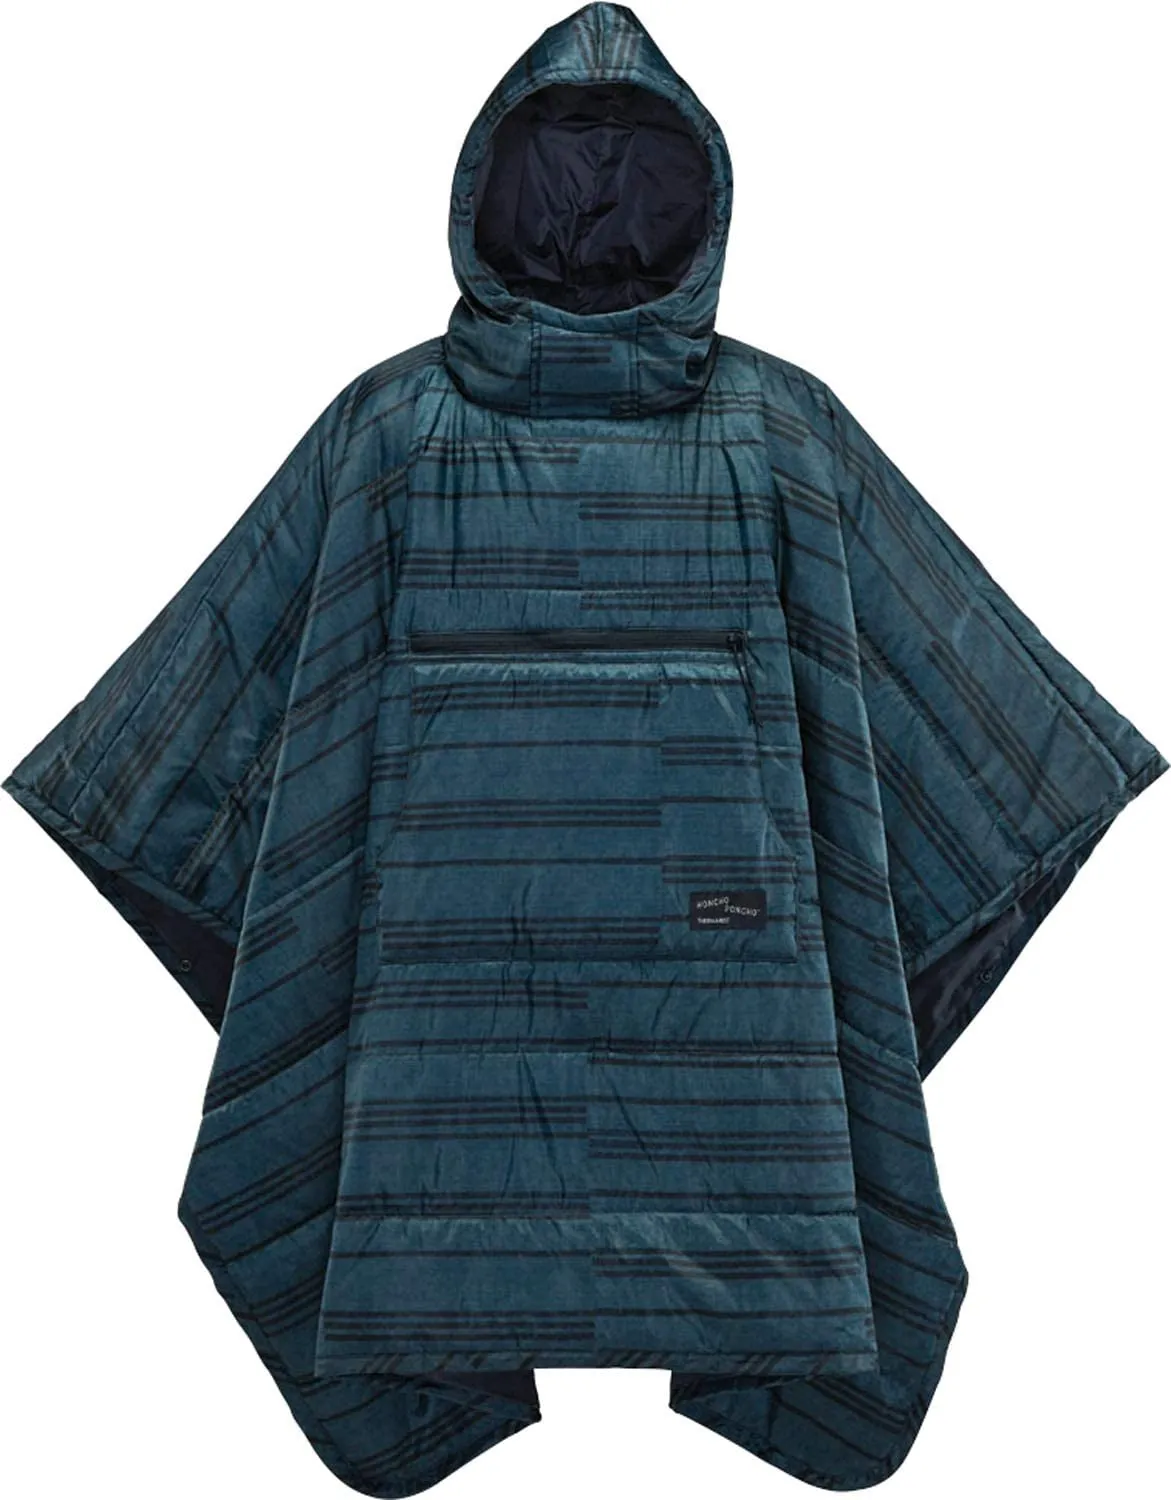 Patterned outdoor poncho